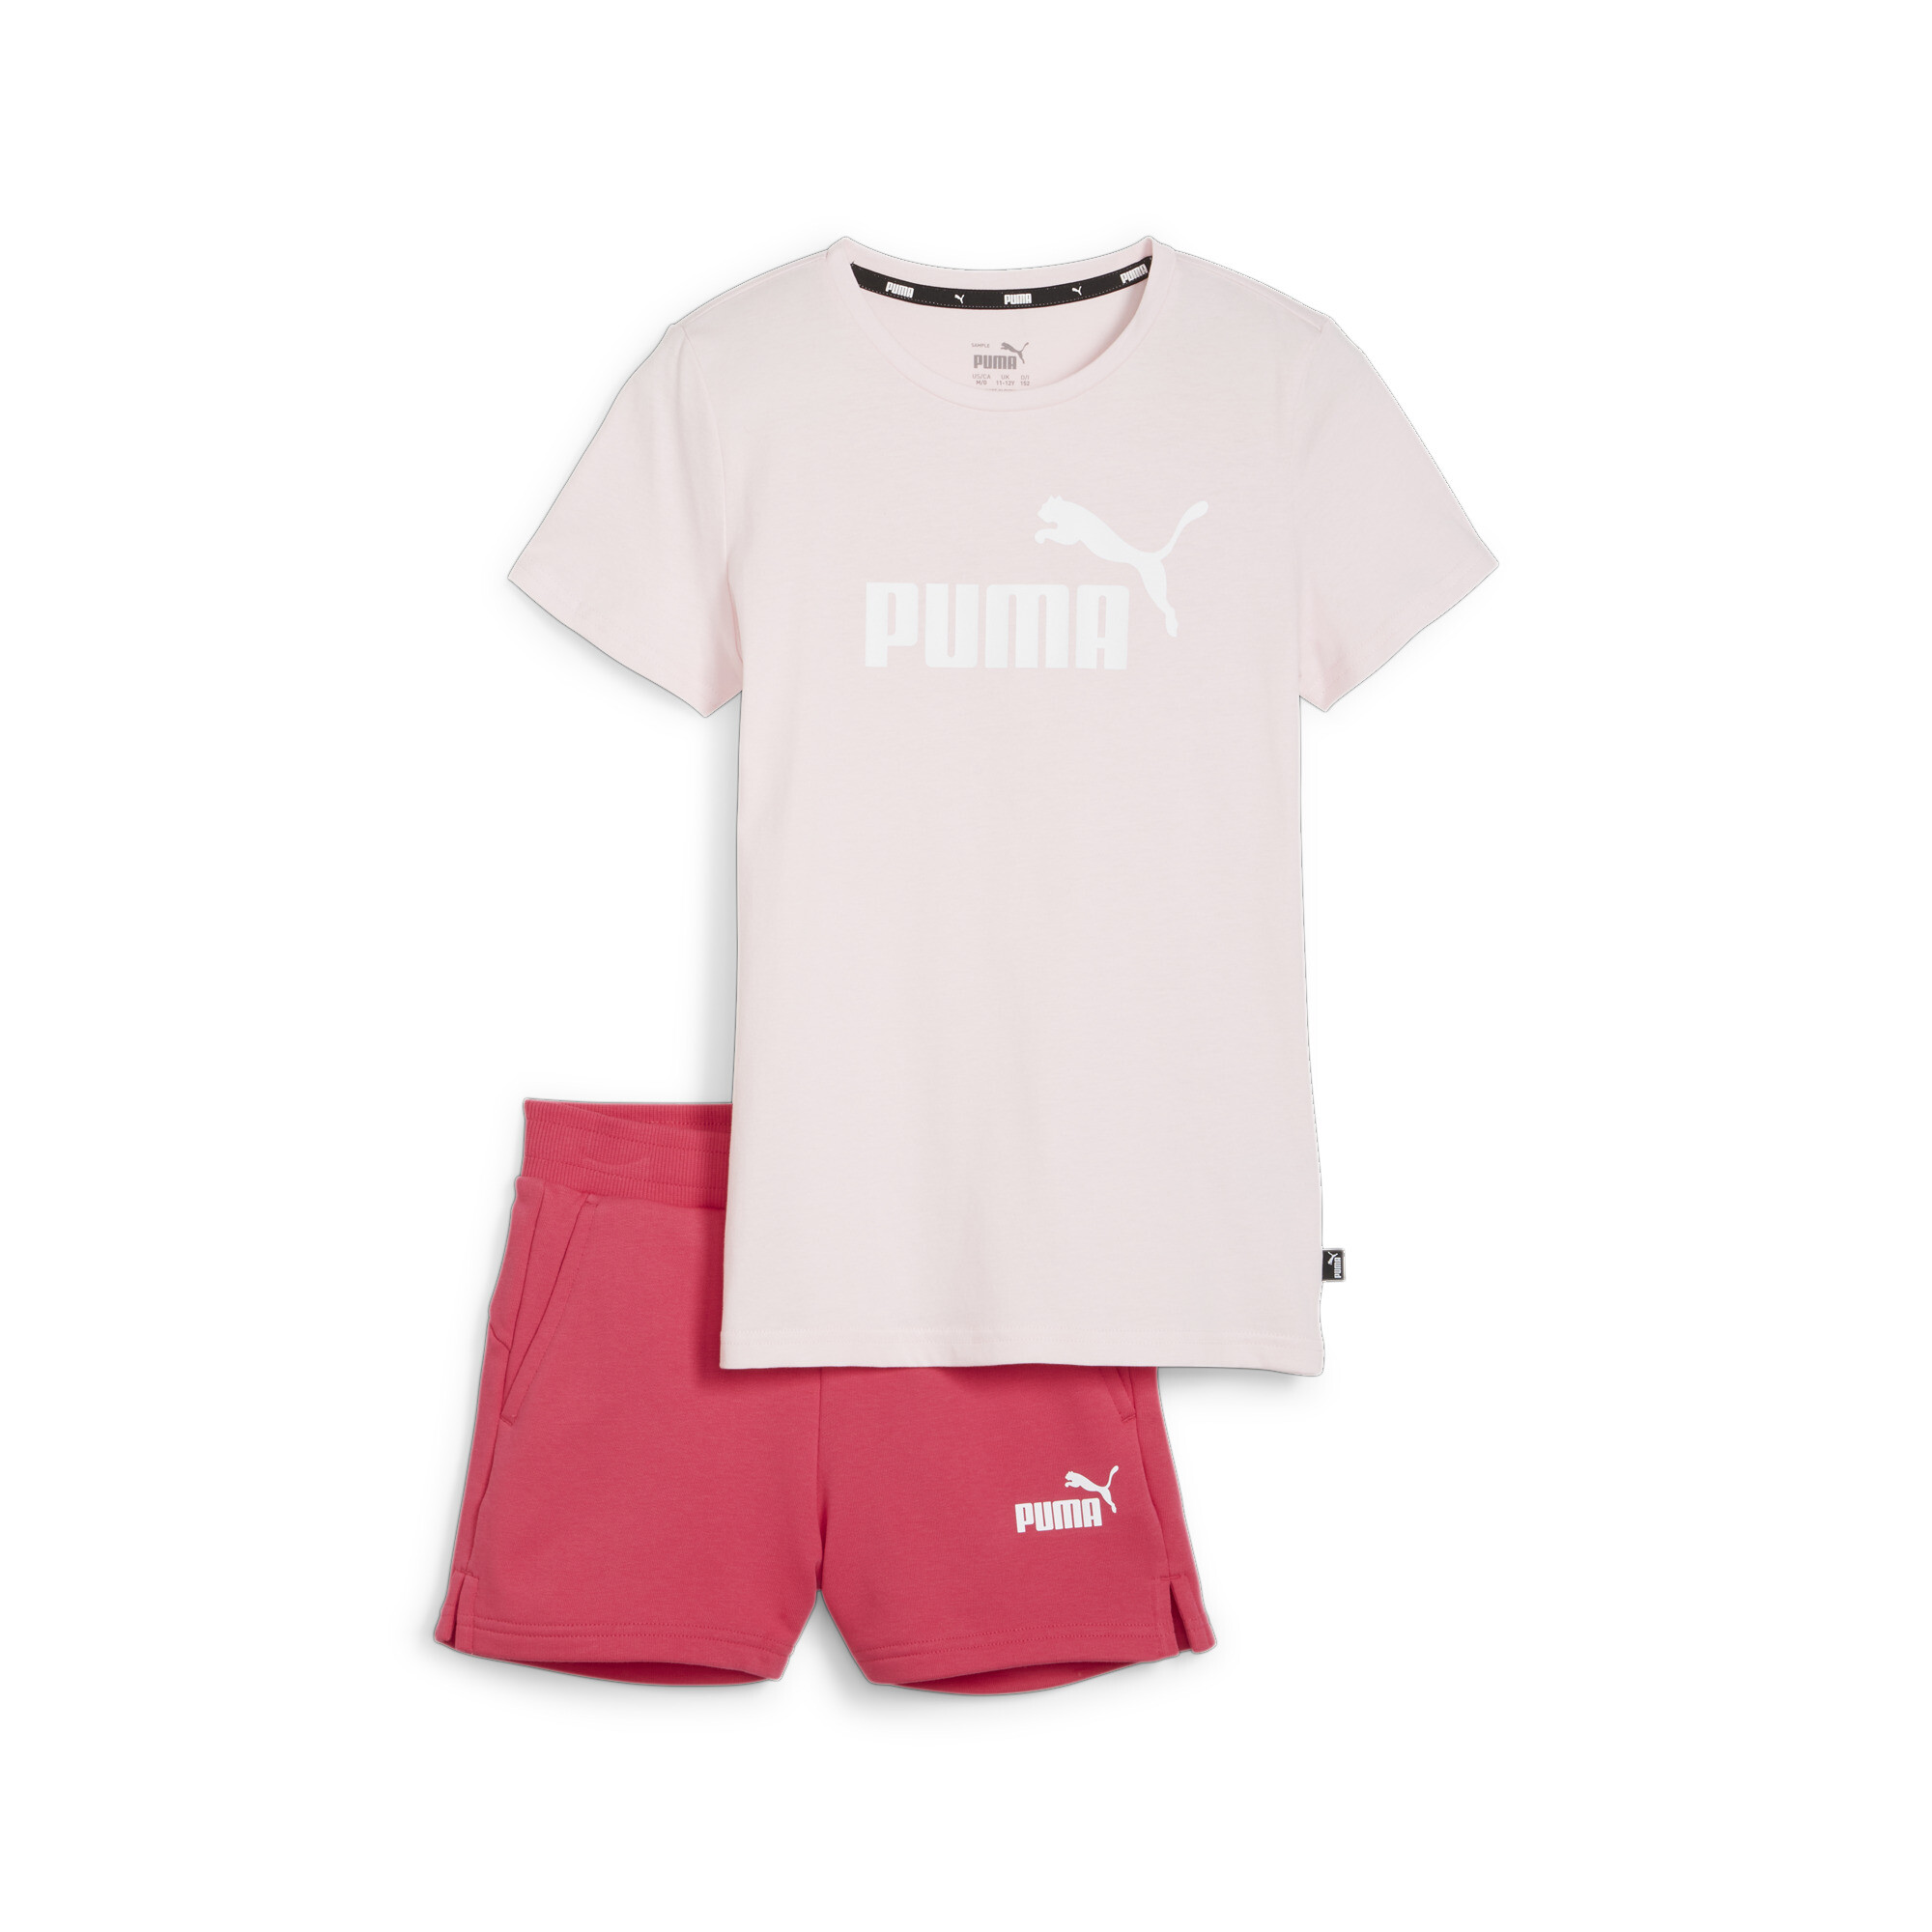 Women's Puma Logo Tee And Shorts Youth Set, Pink, Size 4-5Y, Clothing